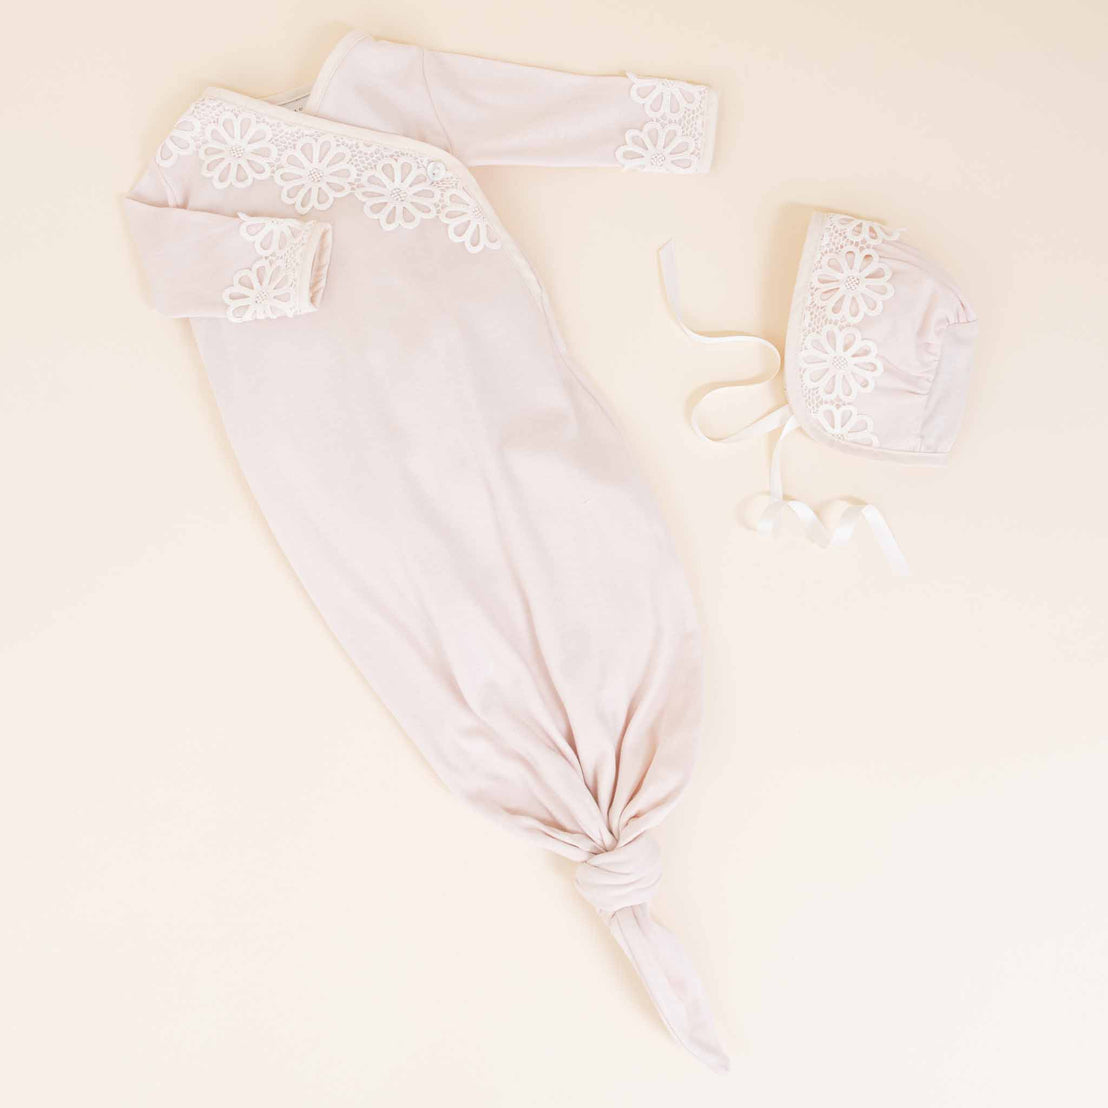 A flat lay image of the Hannah Knot Gown & Bonnet including an ivory gown with lace detailing, matching hat, and booties on a light beige background.